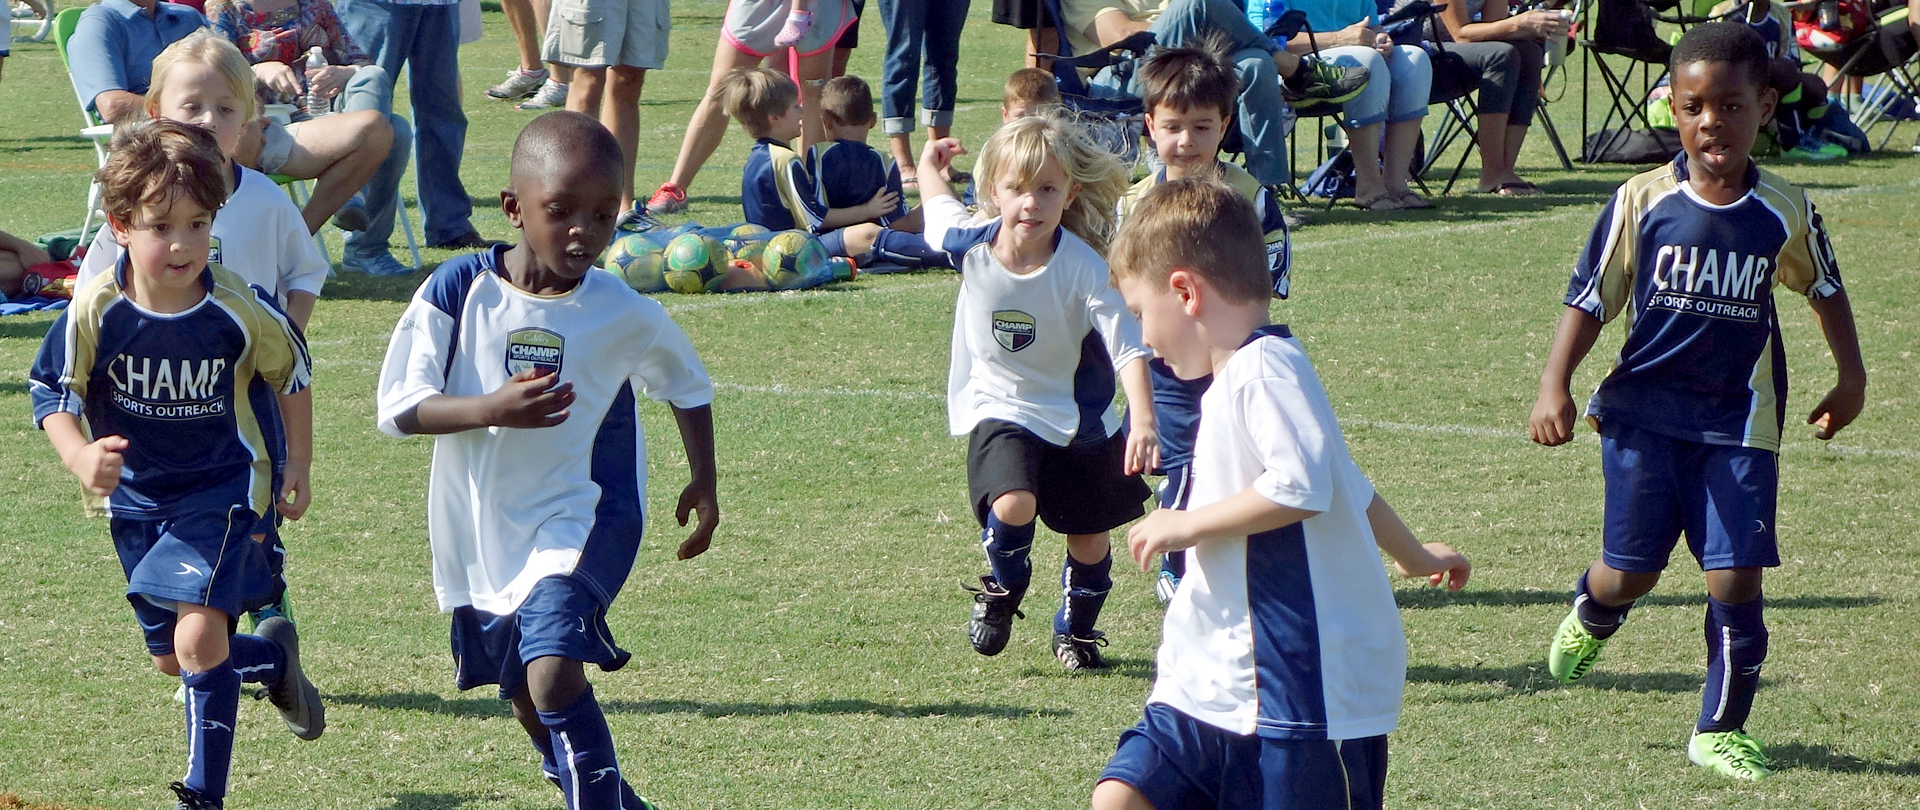 Youth Rec Soccer
CHAMP offers leagues for ages 3–18
 
